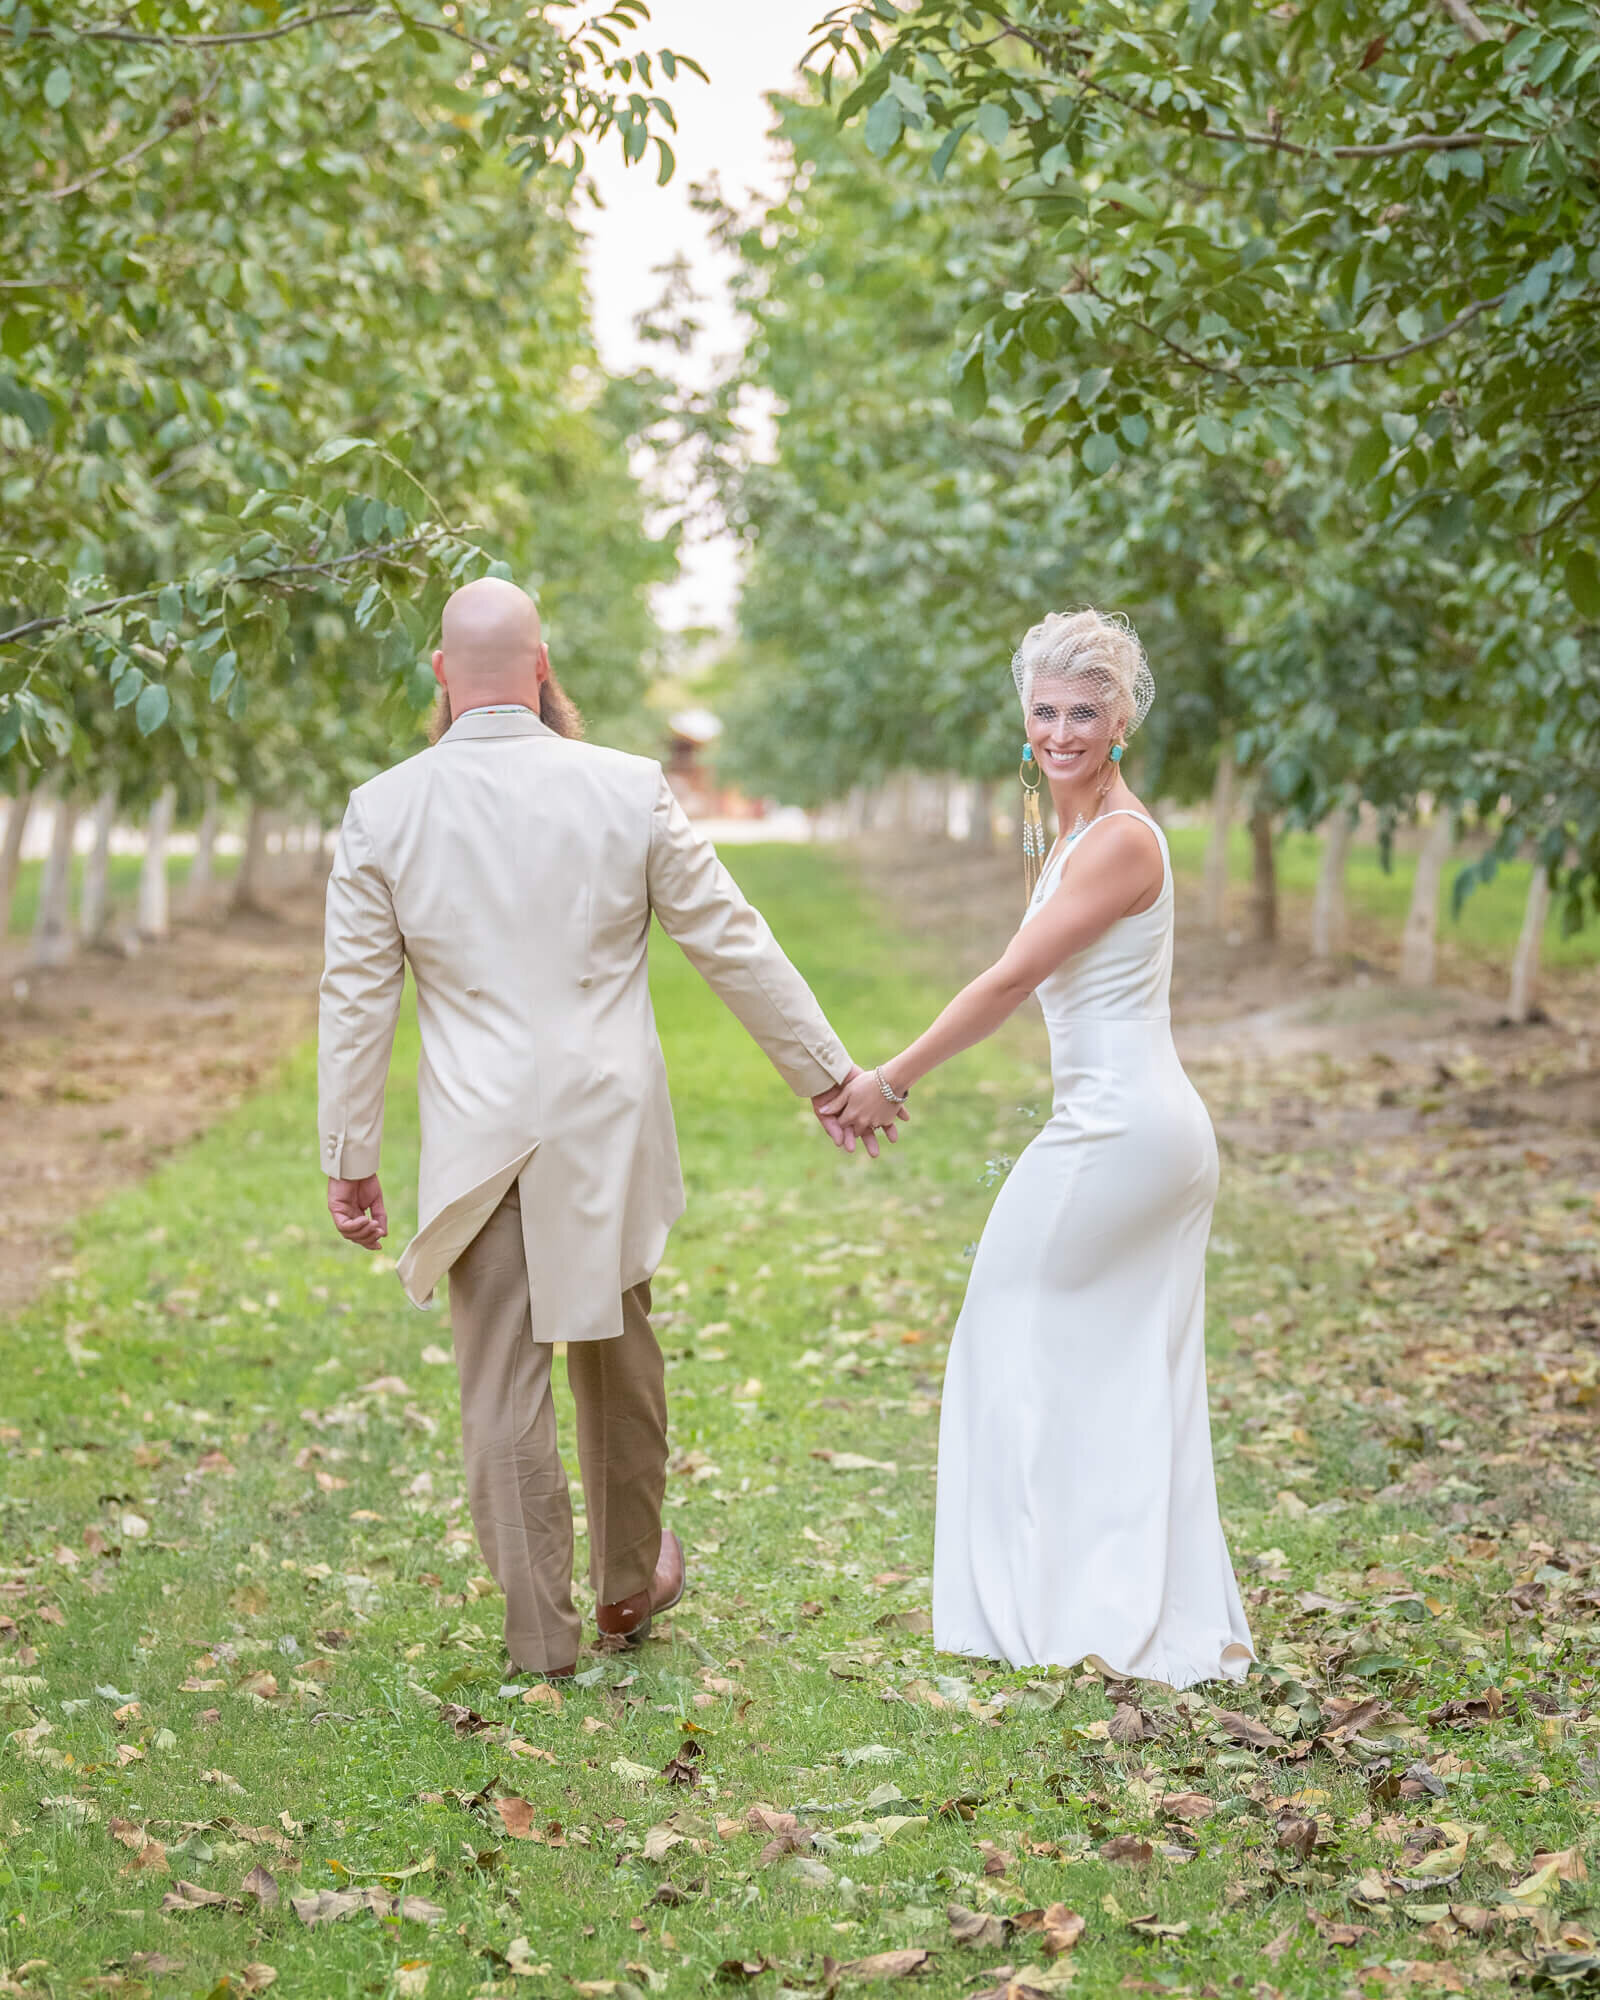 Bride and groom holding hands walking through an orchard